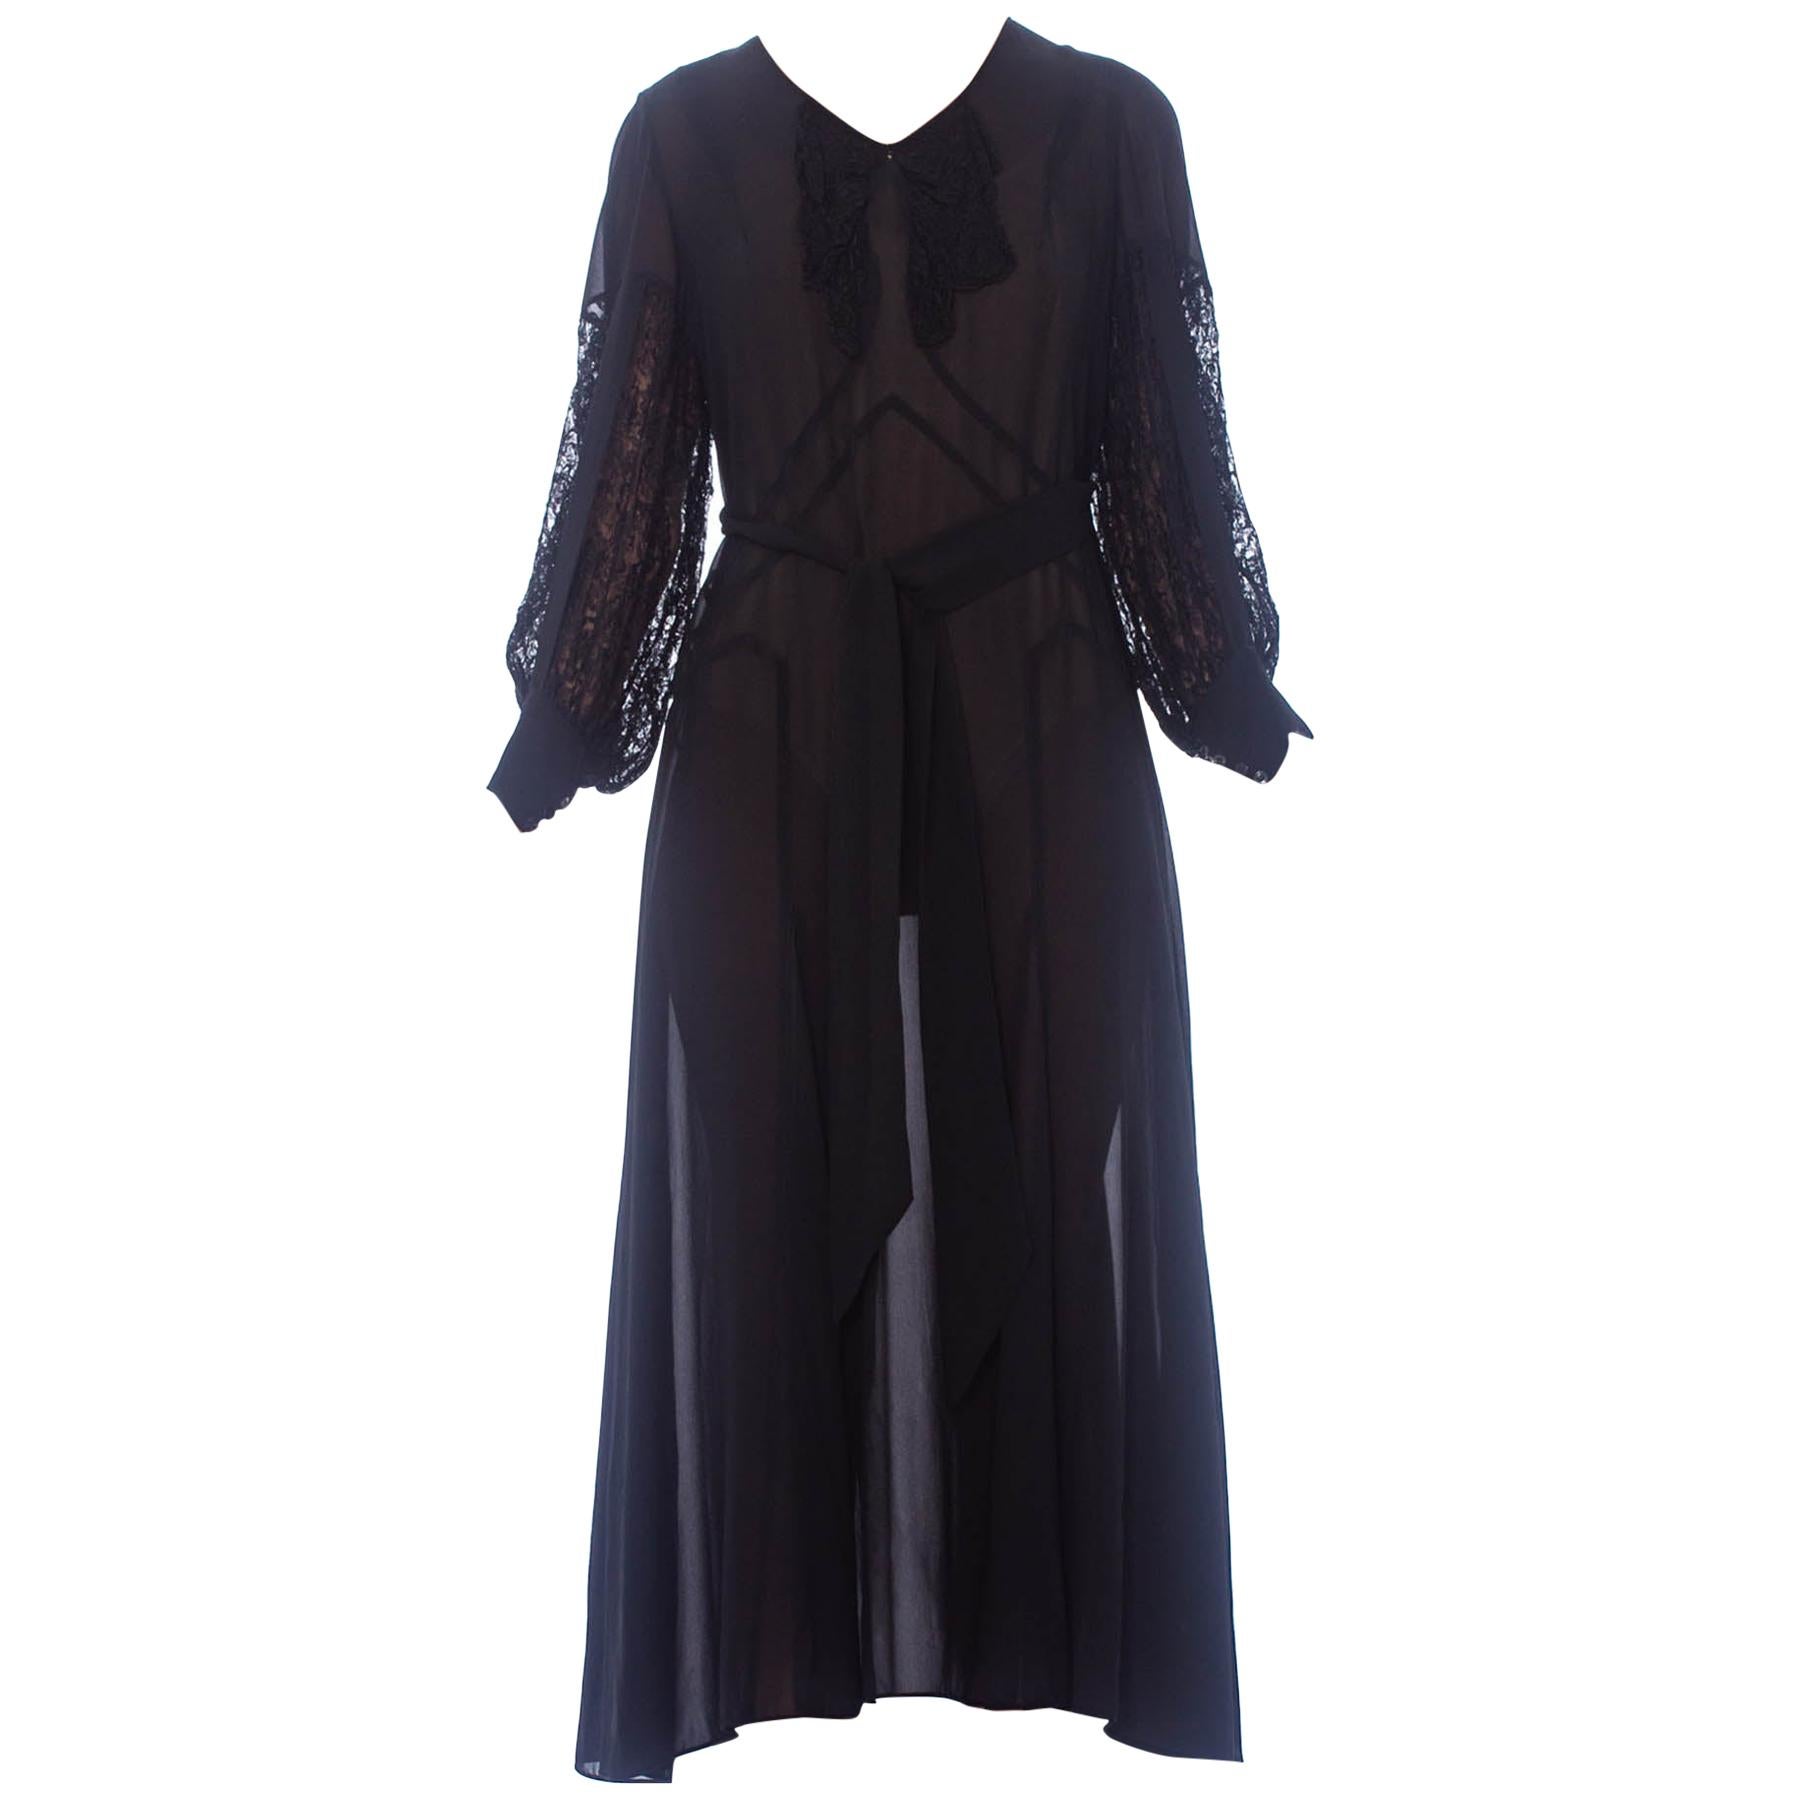 1930S Black Silk Chiffon Tie Waist Dress With Lace Inset Sleeves For Sale